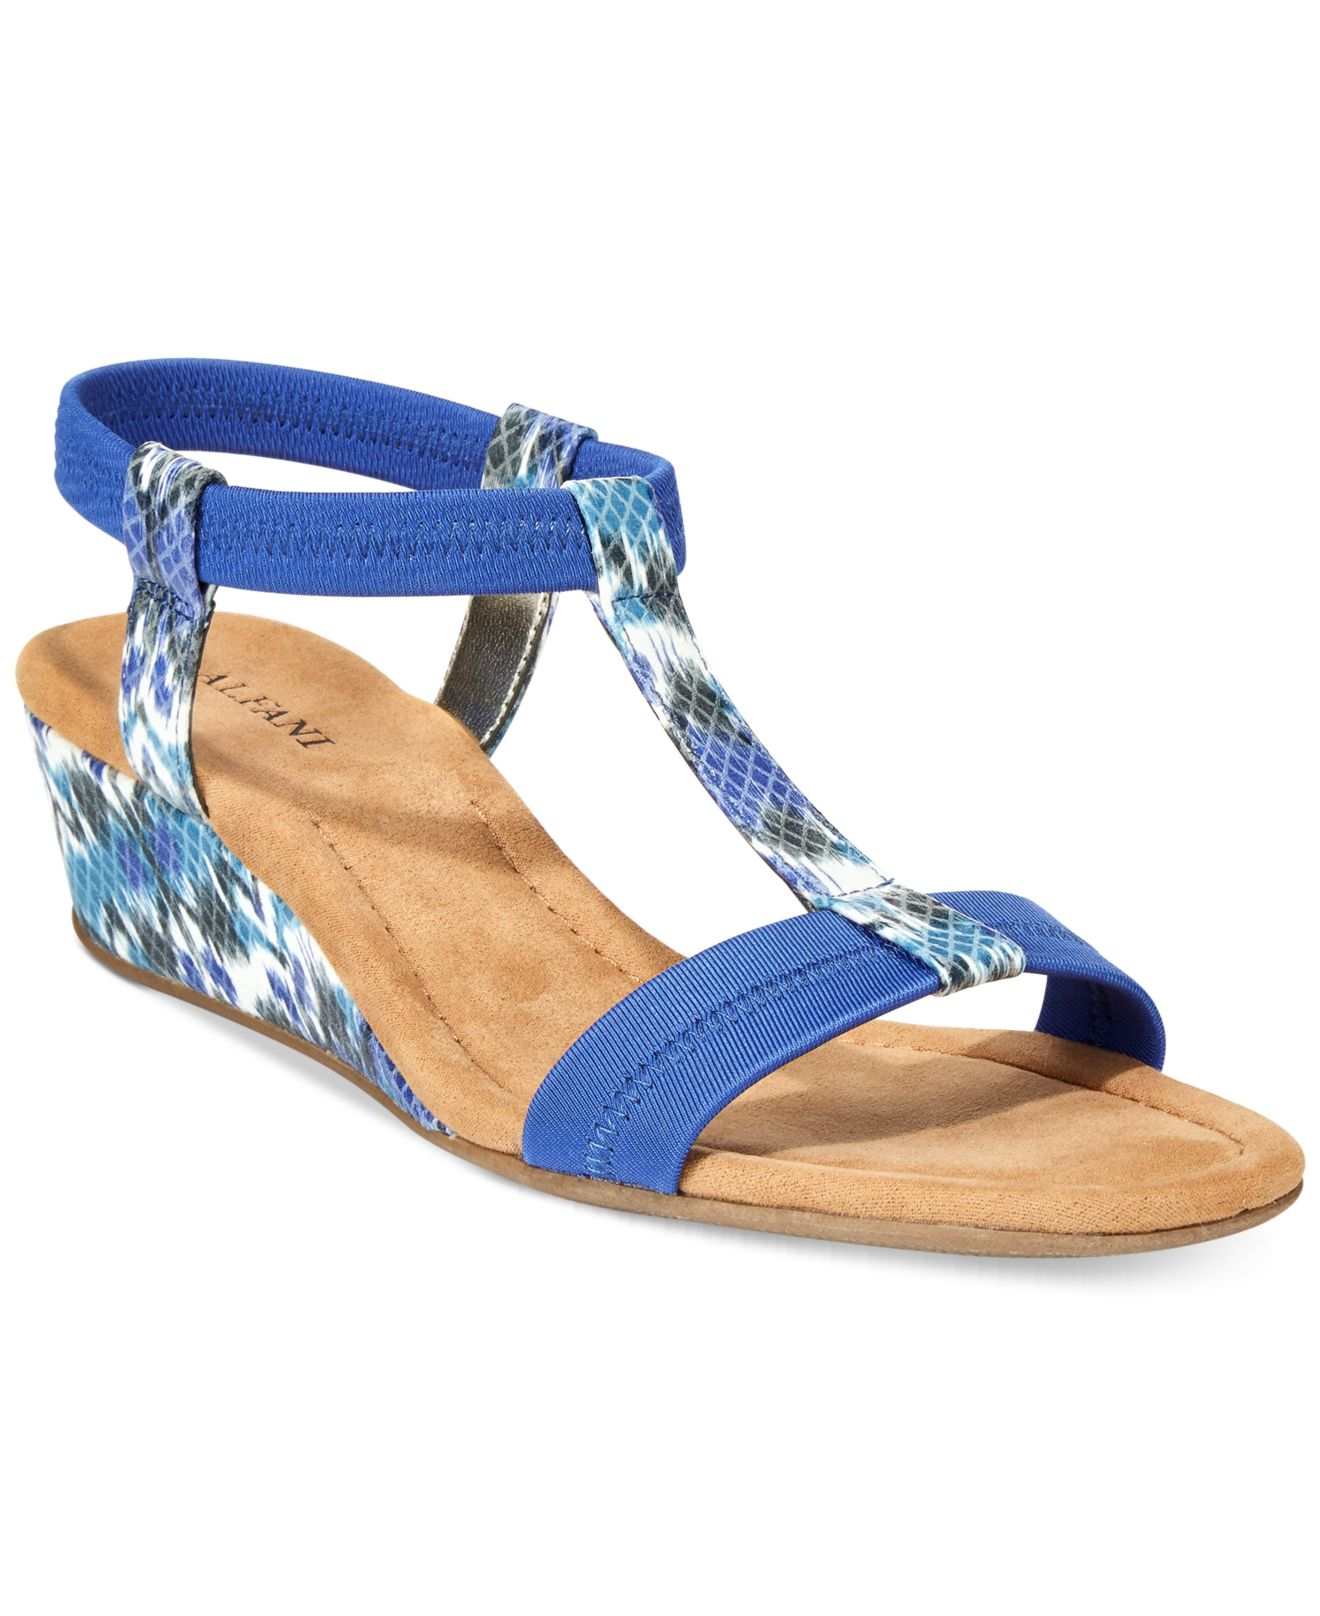 Lyst - Alfani Women's Voyage Wedge Sandals, Only At Macy's in Blue